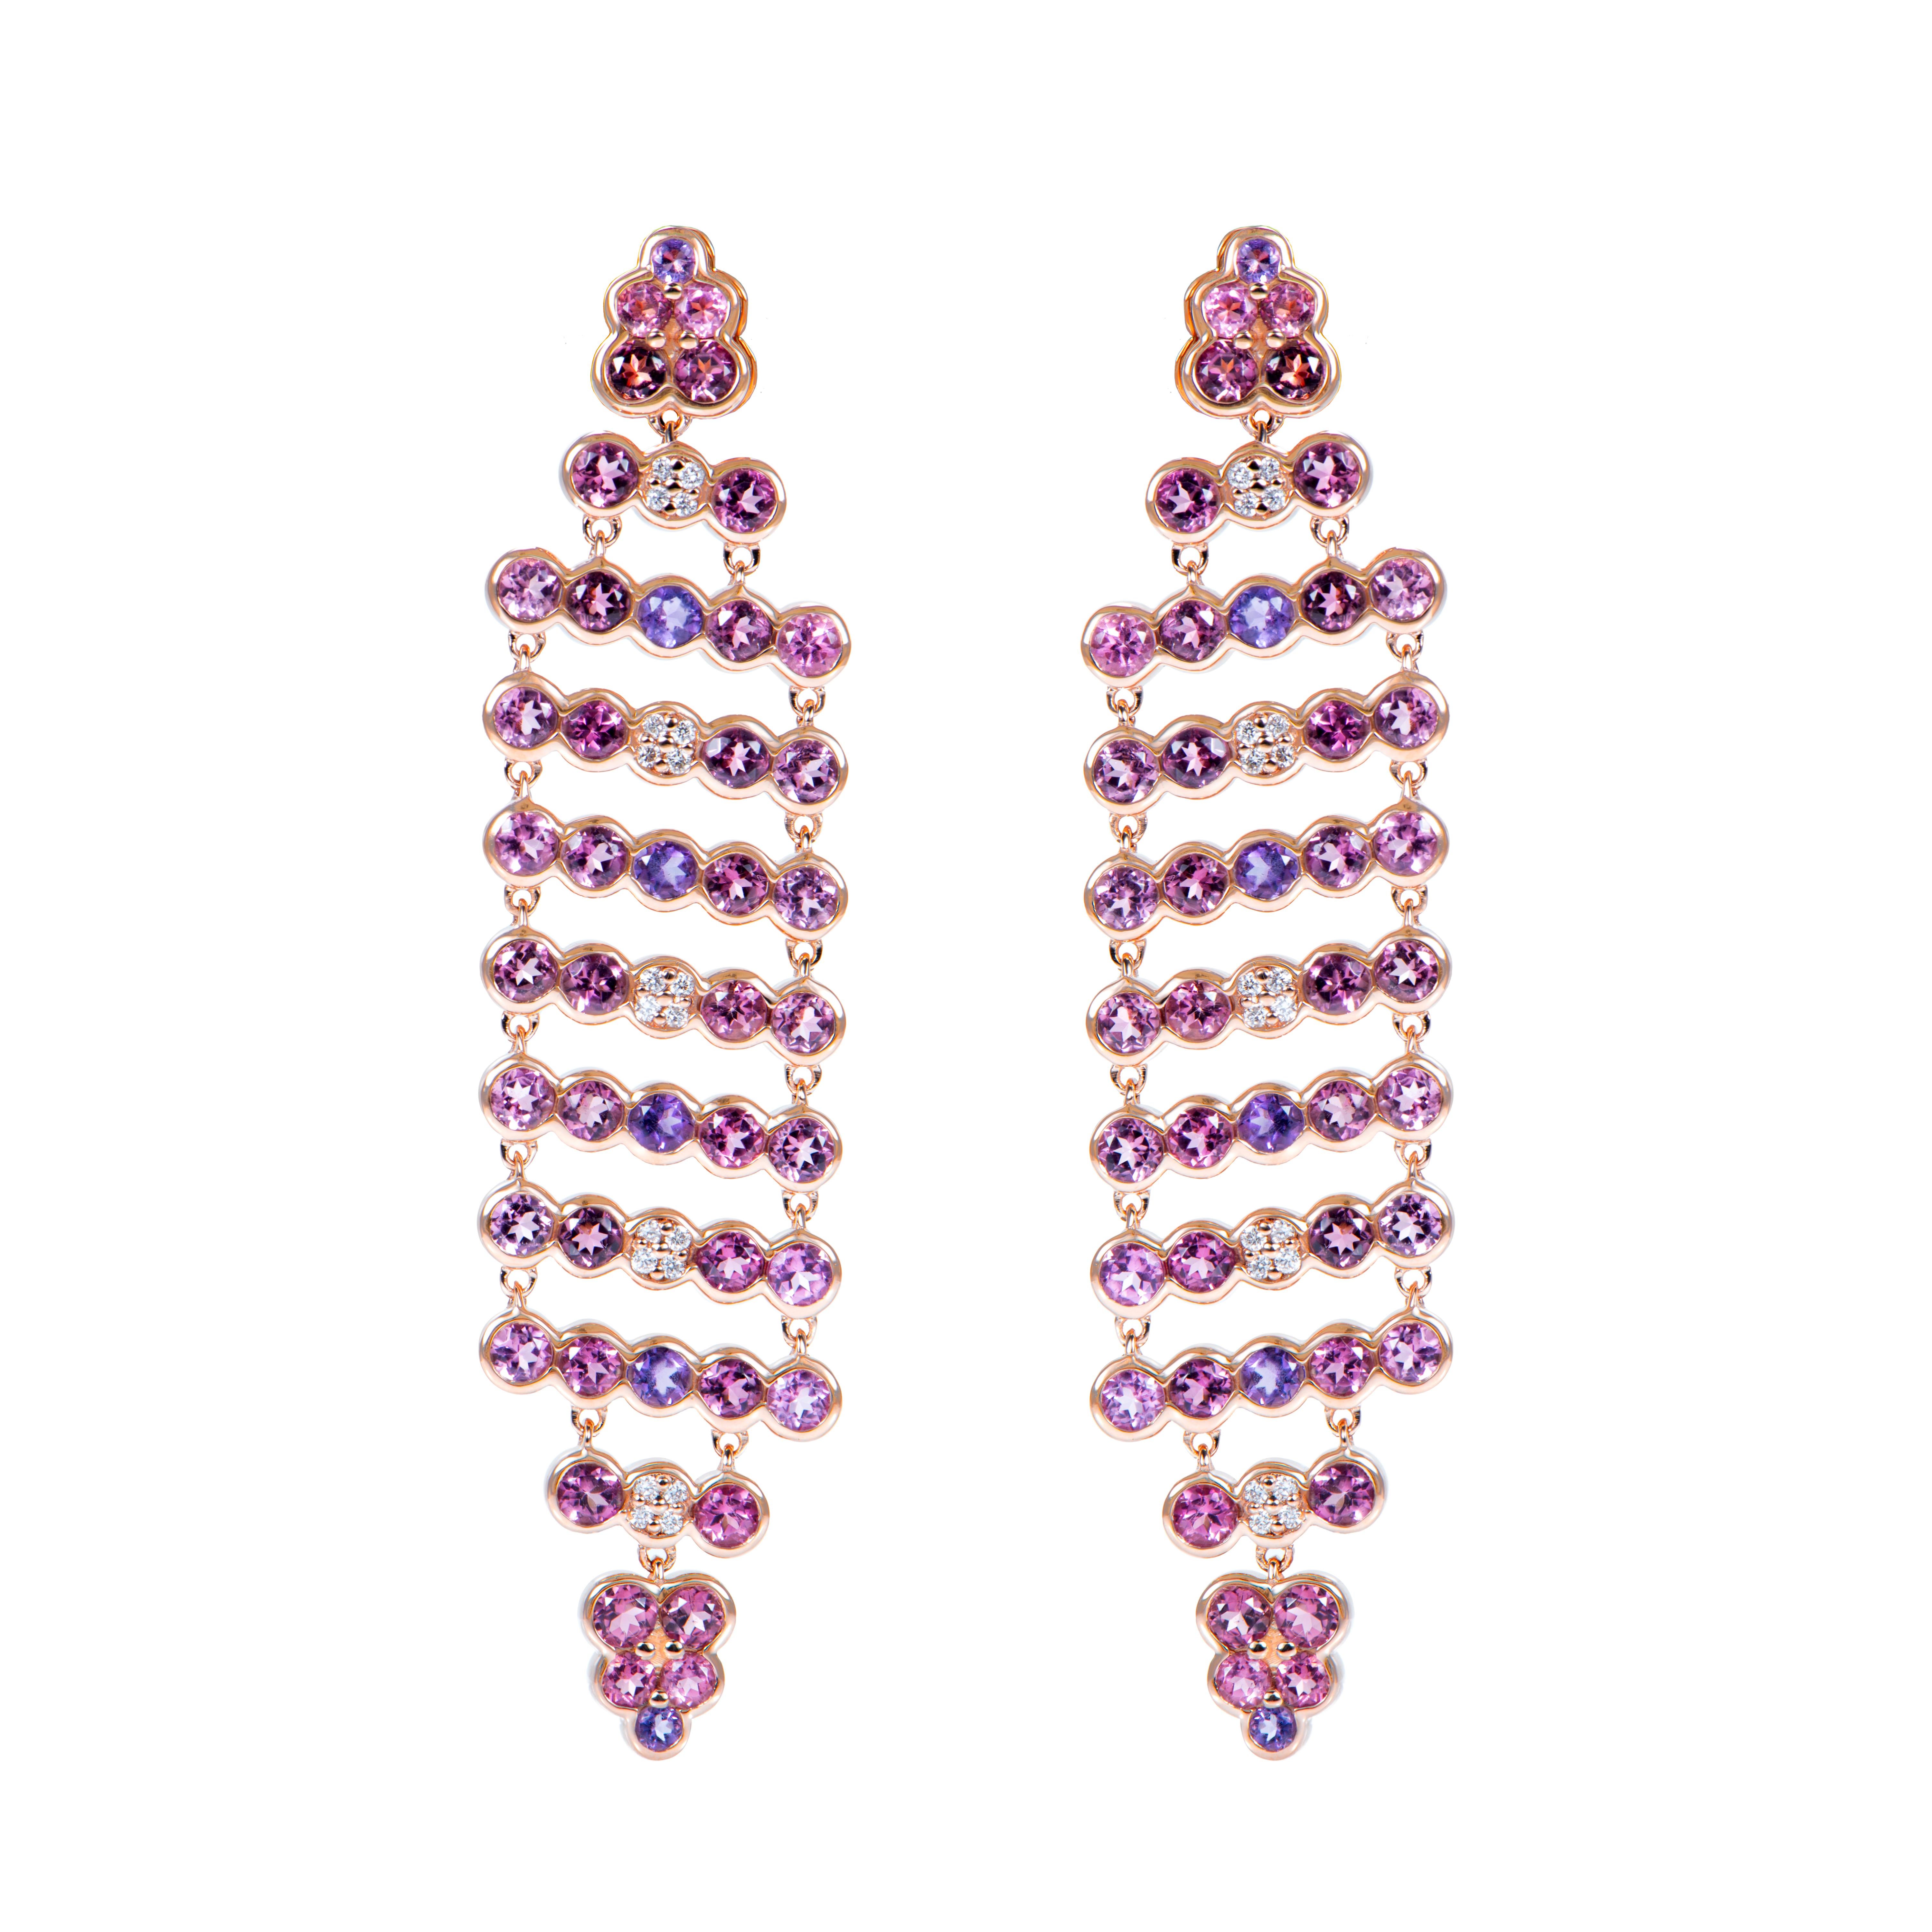 Contemporary Amethyst Dangle Earring with Pink Tourmaline and Diamond in 18 Karat Rose Gold. For Sale